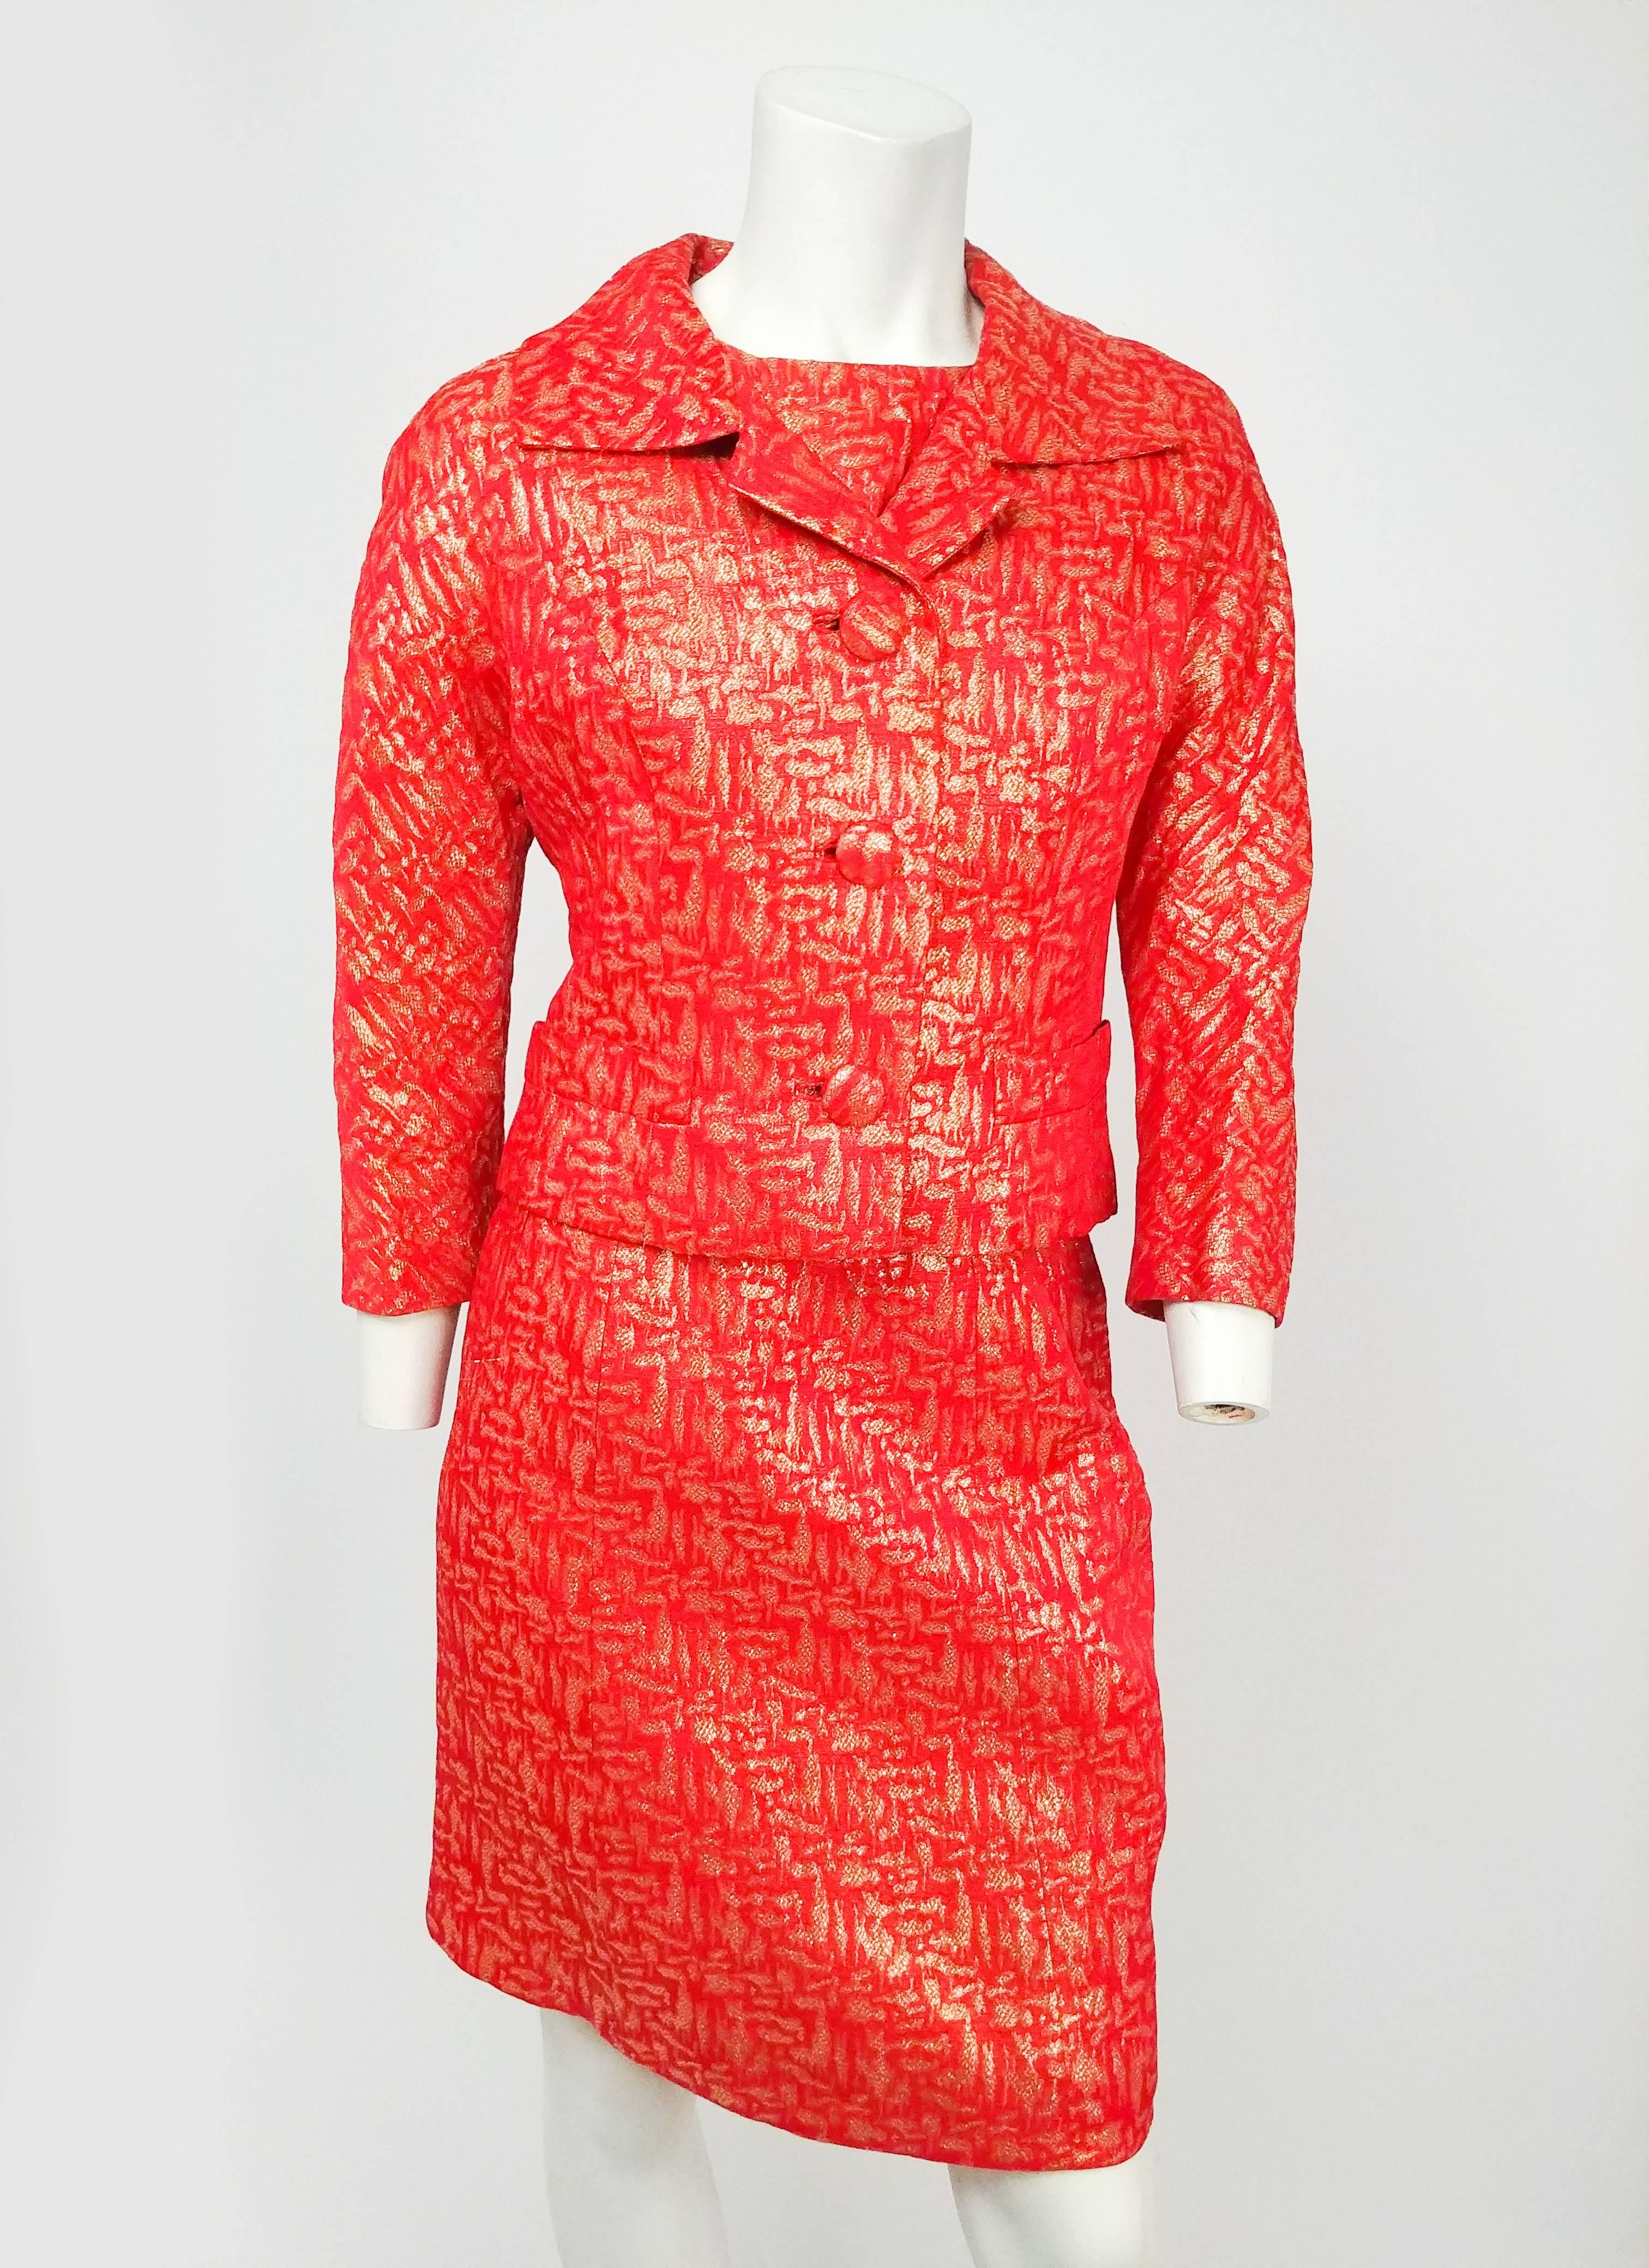 1960s Red & Gold Brocade Jacket, Top, & Skirt Suit Set. Matching three piece set in red with metallic gold thread woven throughout. Jacket has traditional notched collar and buttons down front with covered buttons, glove length sleeves. Short sleeve